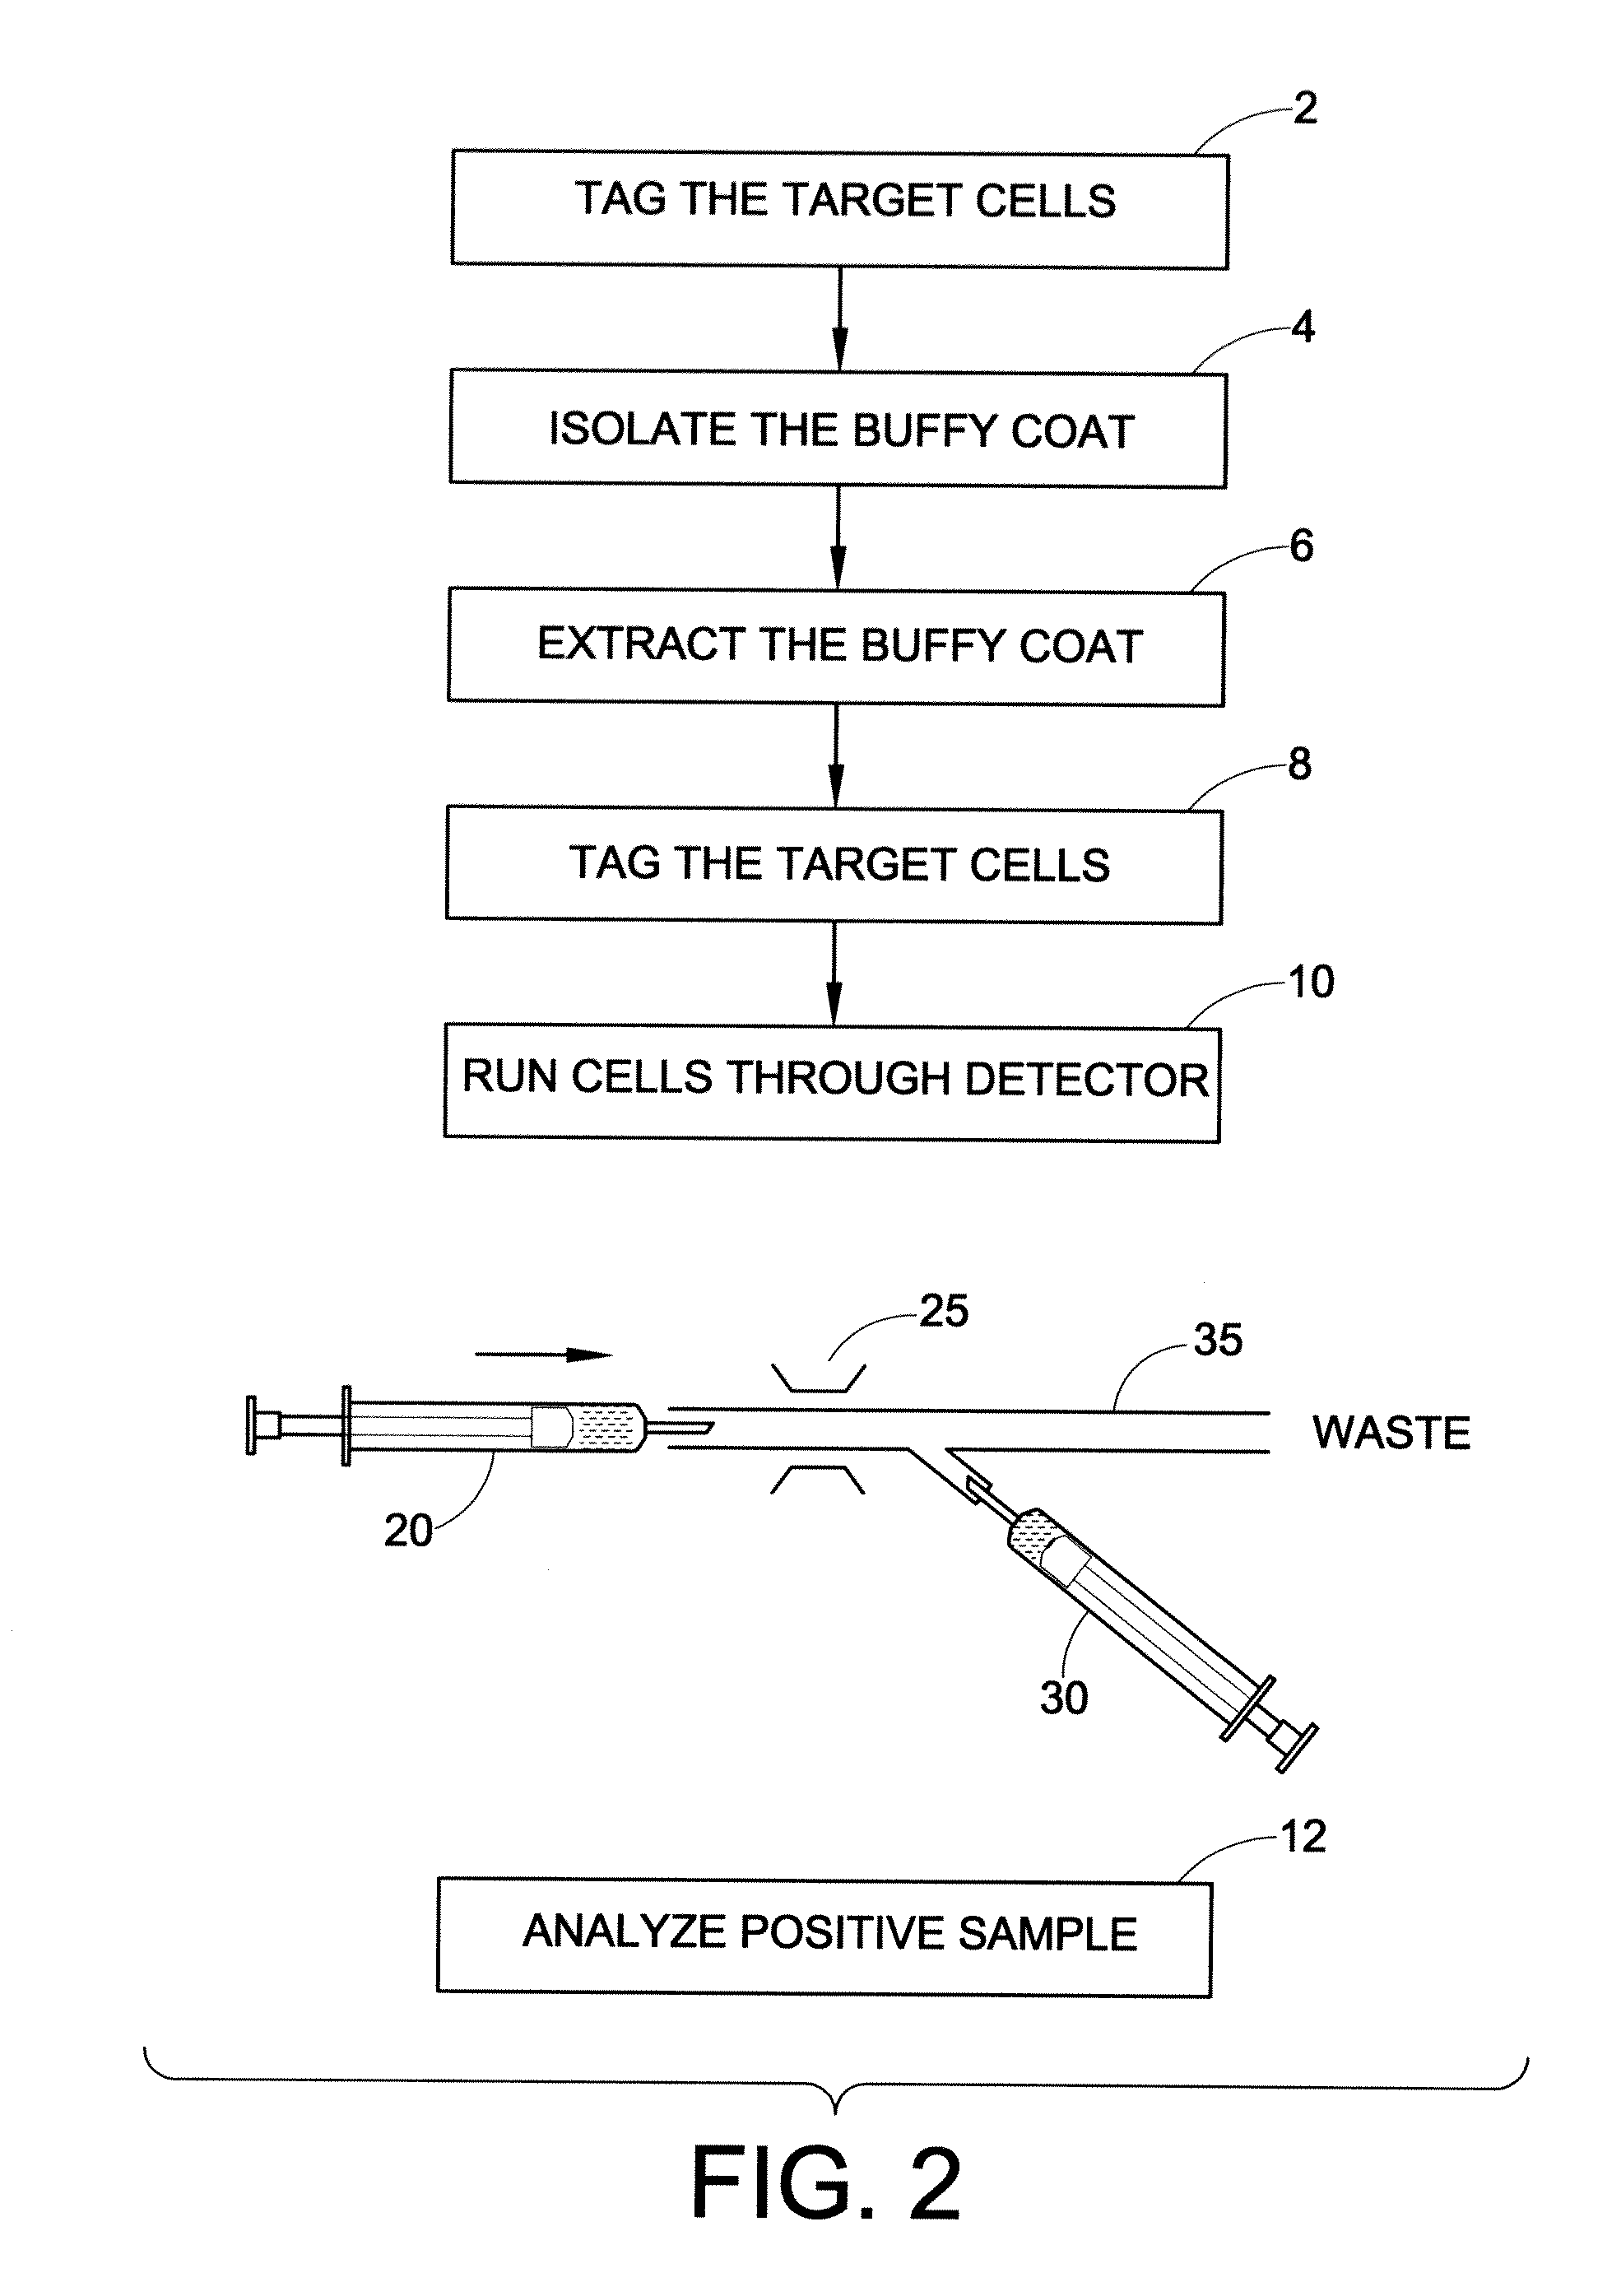 Buffy coat separator float systems and methods